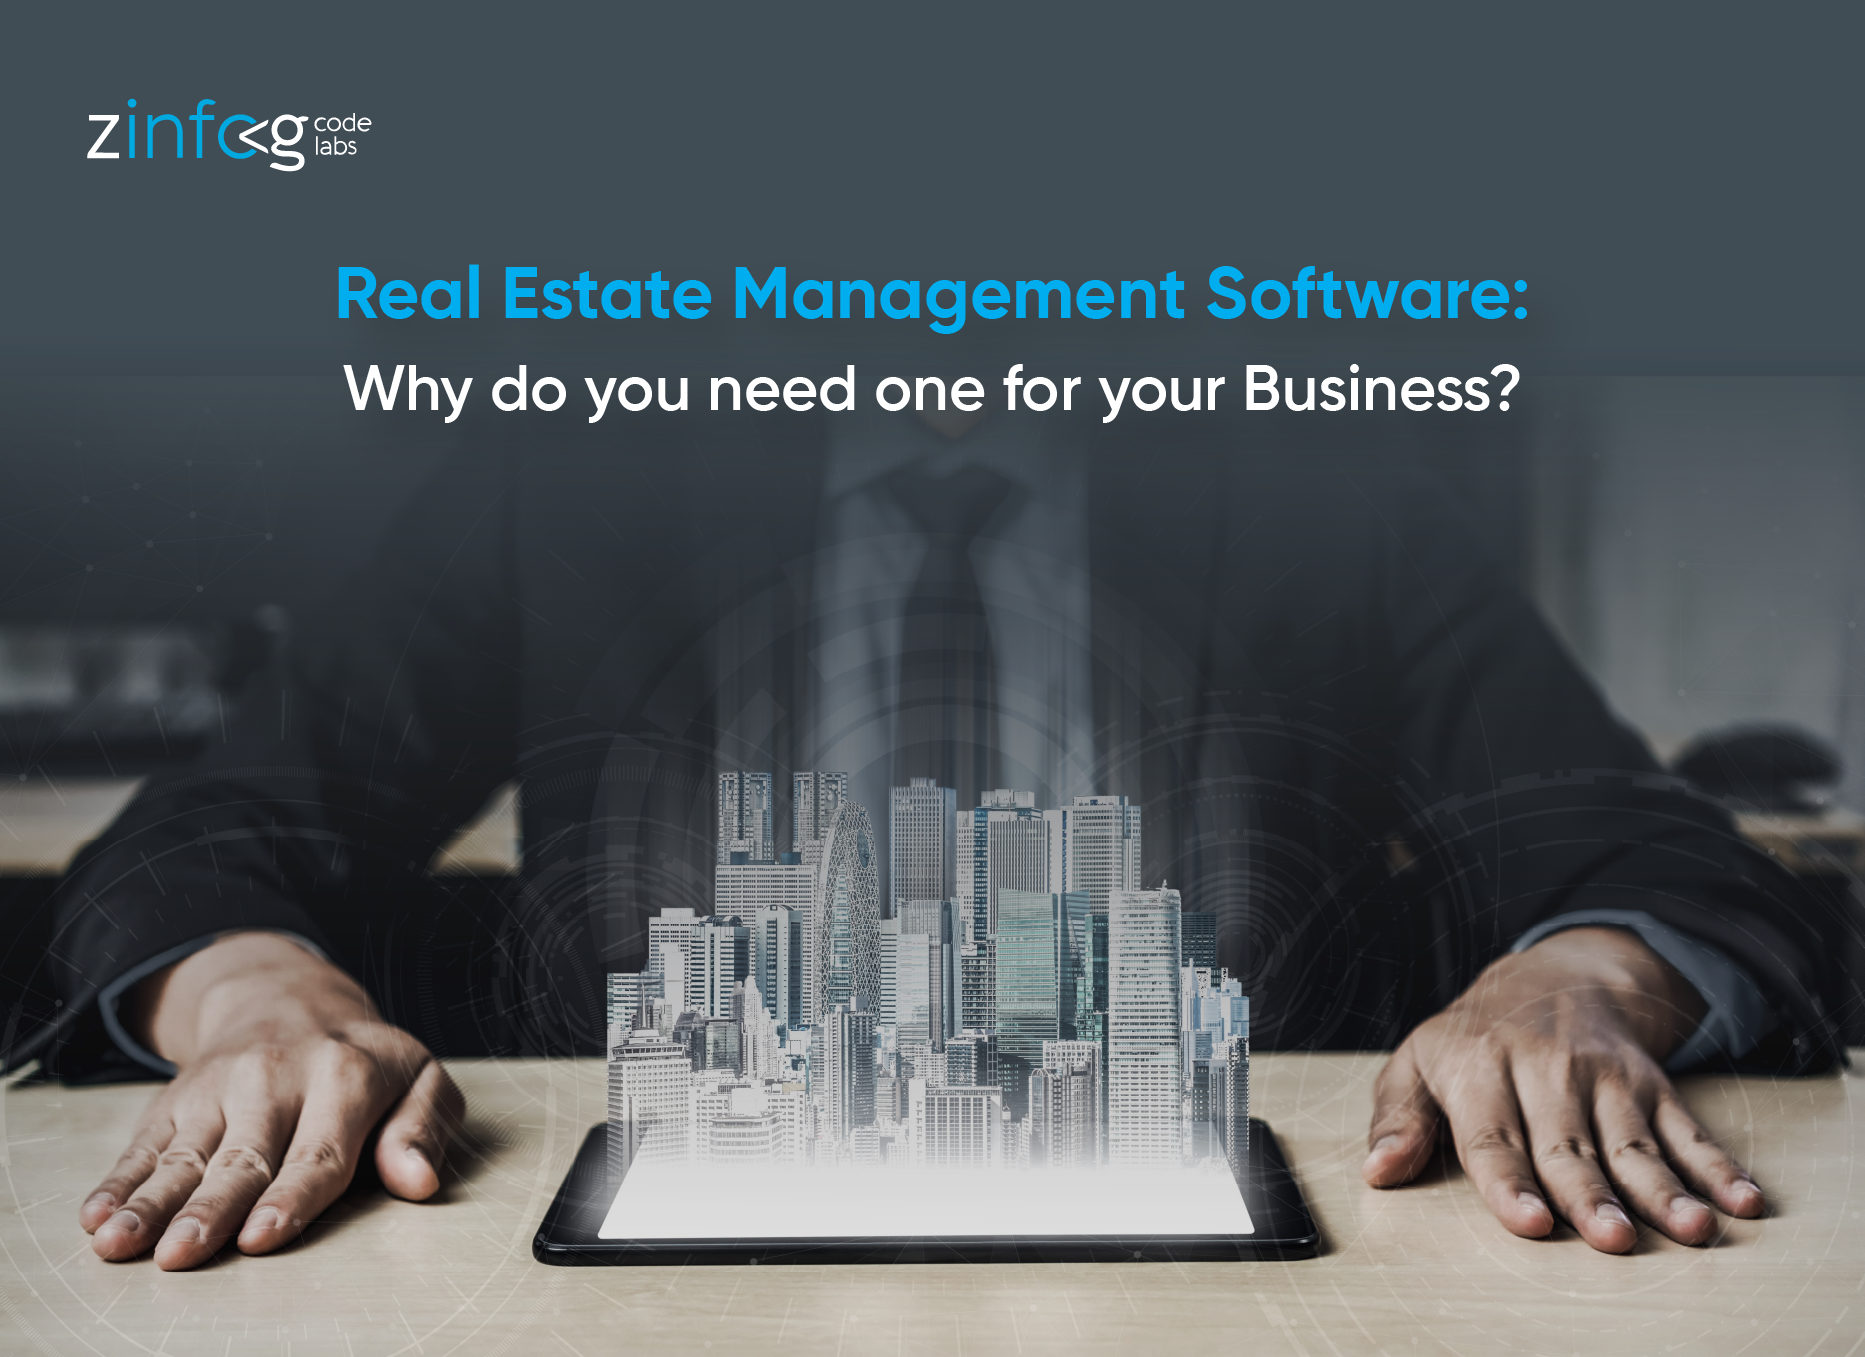 real-estate-management-software-why-do-you-need-one-for-your-business.html